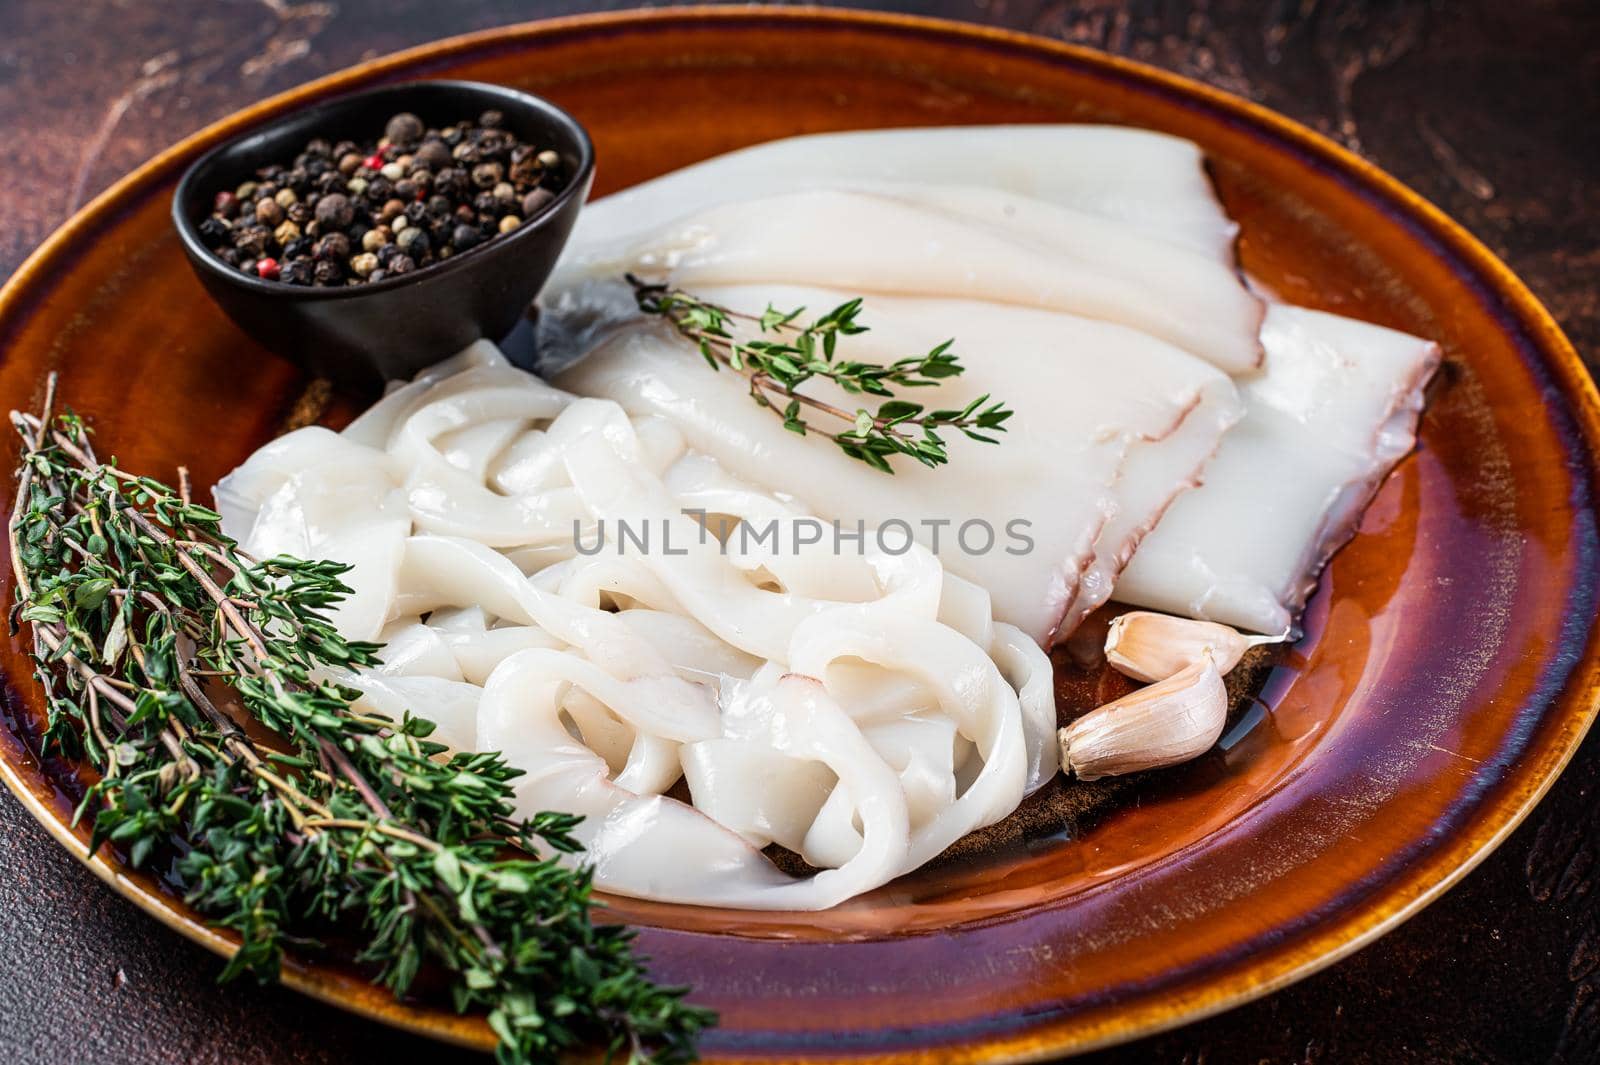 Sliced raw rings Calamari in a rustic plate with rosemary. Dark background. Top view.